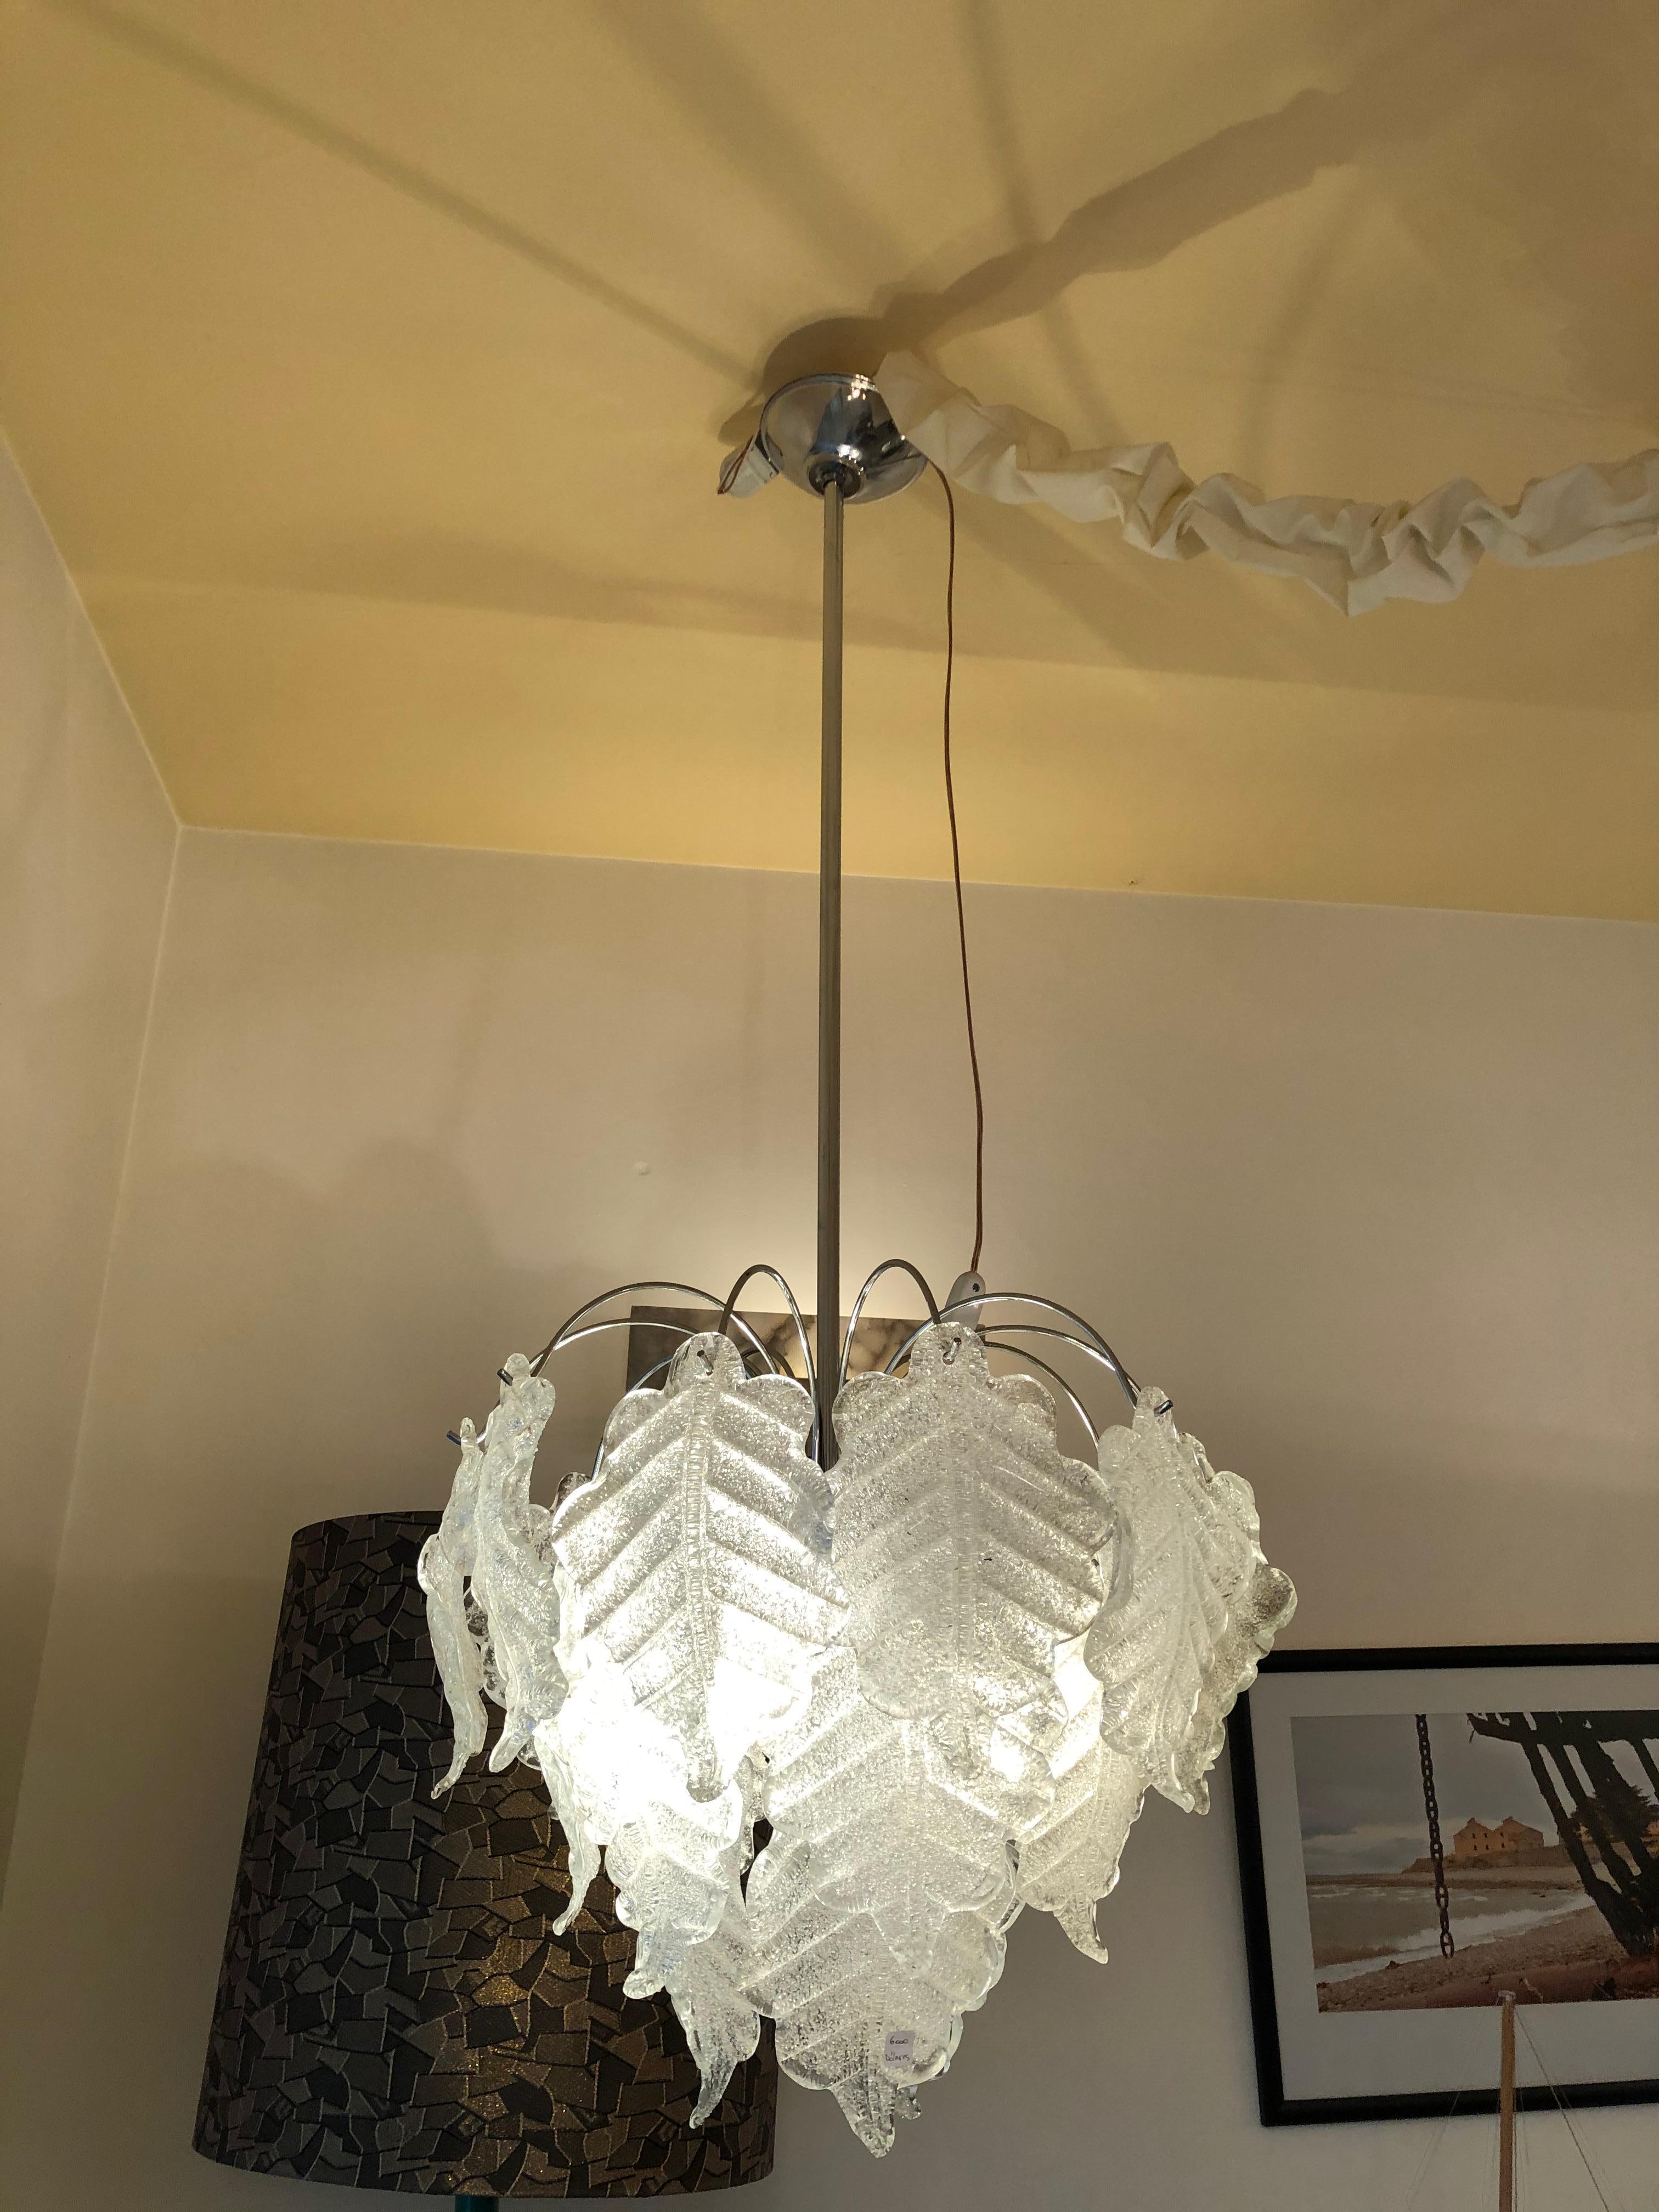 Hanging lamp.

Material: Chrome, murano
Style: 1950
Country: Italian
To take care of your property and the lives of our customers, the new wiring has been done.
We have specialized in the sale of Art Deco and Art Nouveau and Vintage styles since